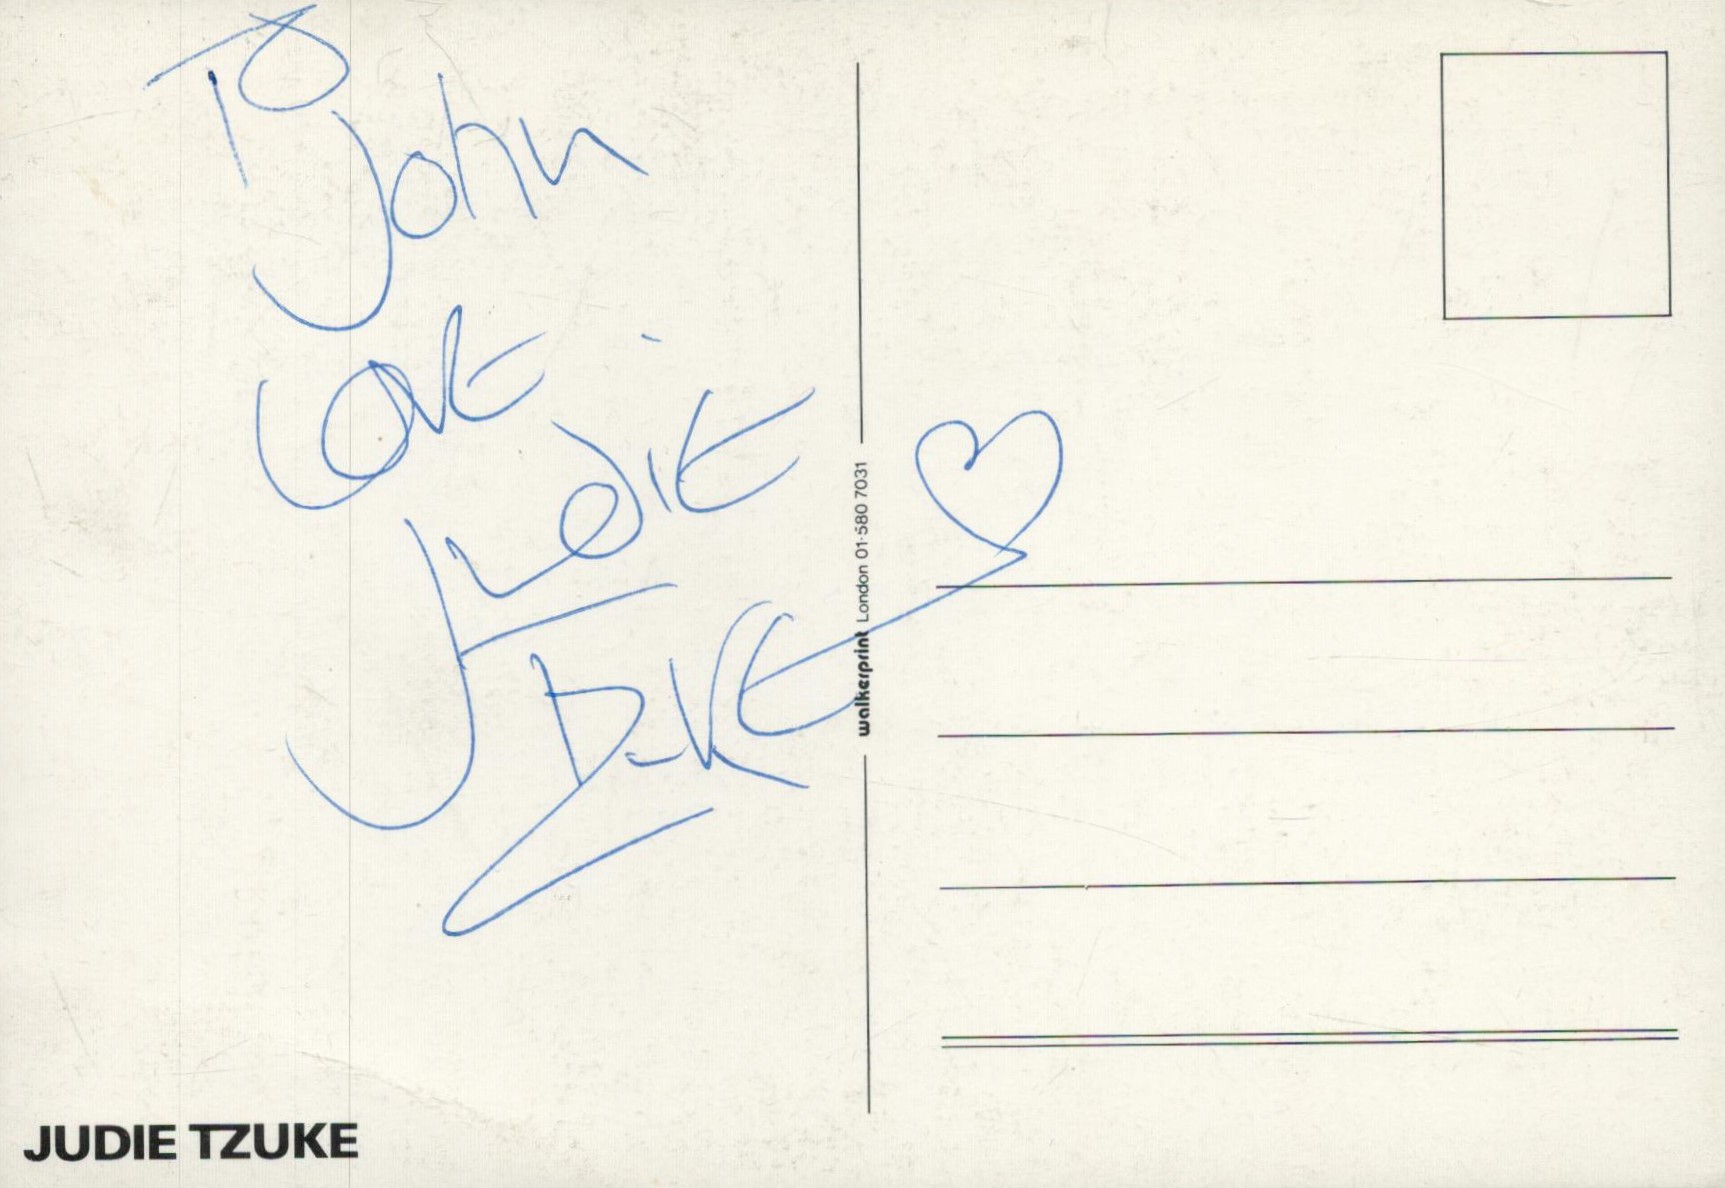 JUDIE TZUKE English Singer signed back of Promo Photocard £4-6. Good Condition. All autographs